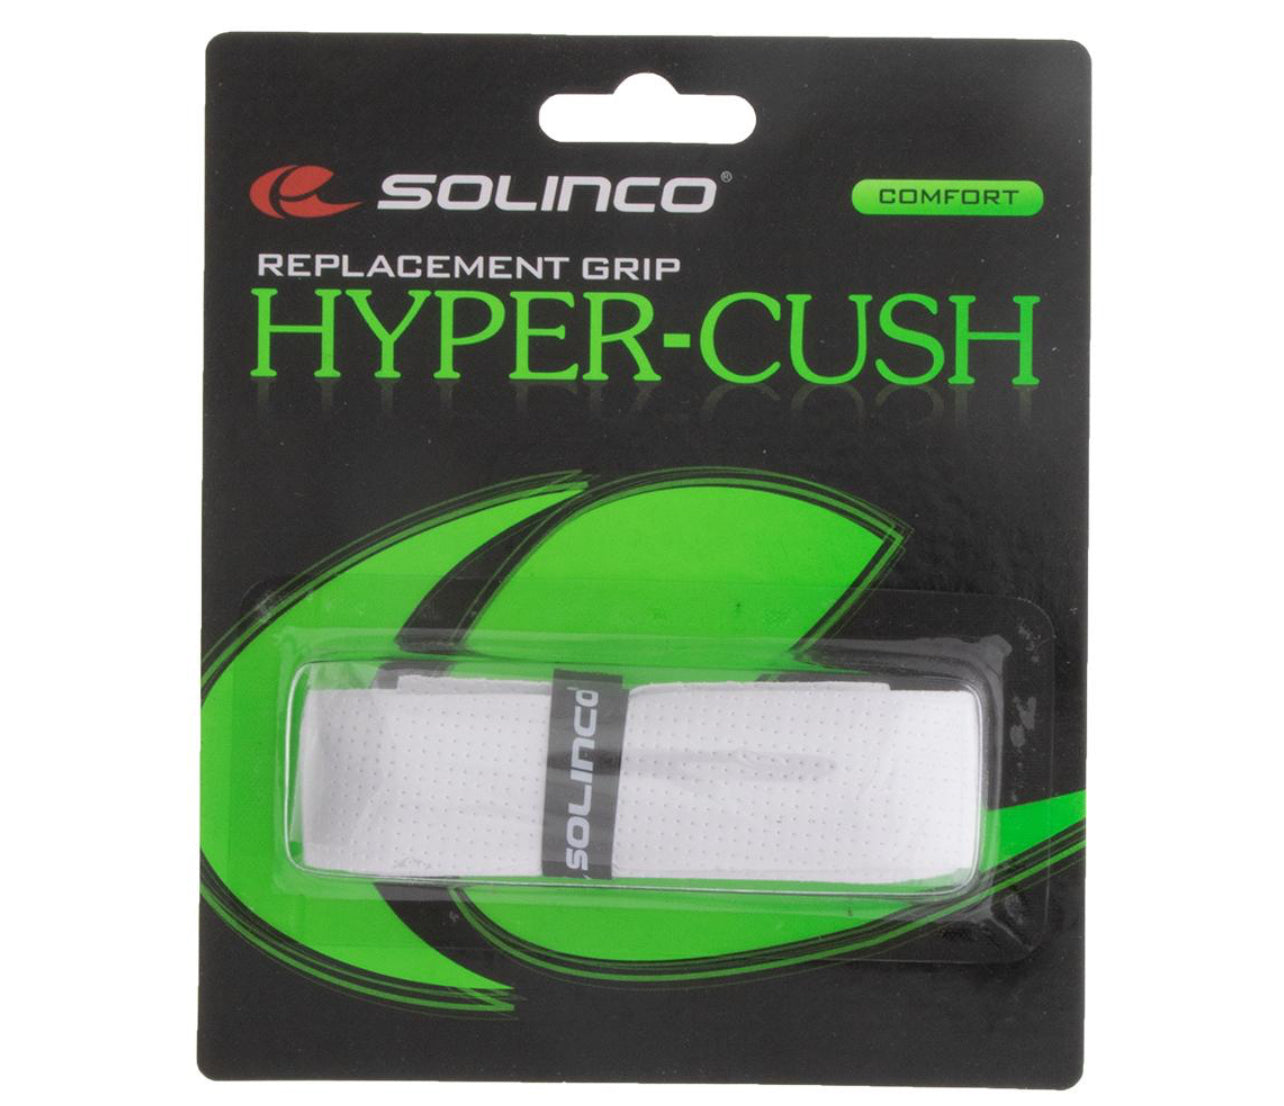 Solinco Hyper Cushion Replacement Grip